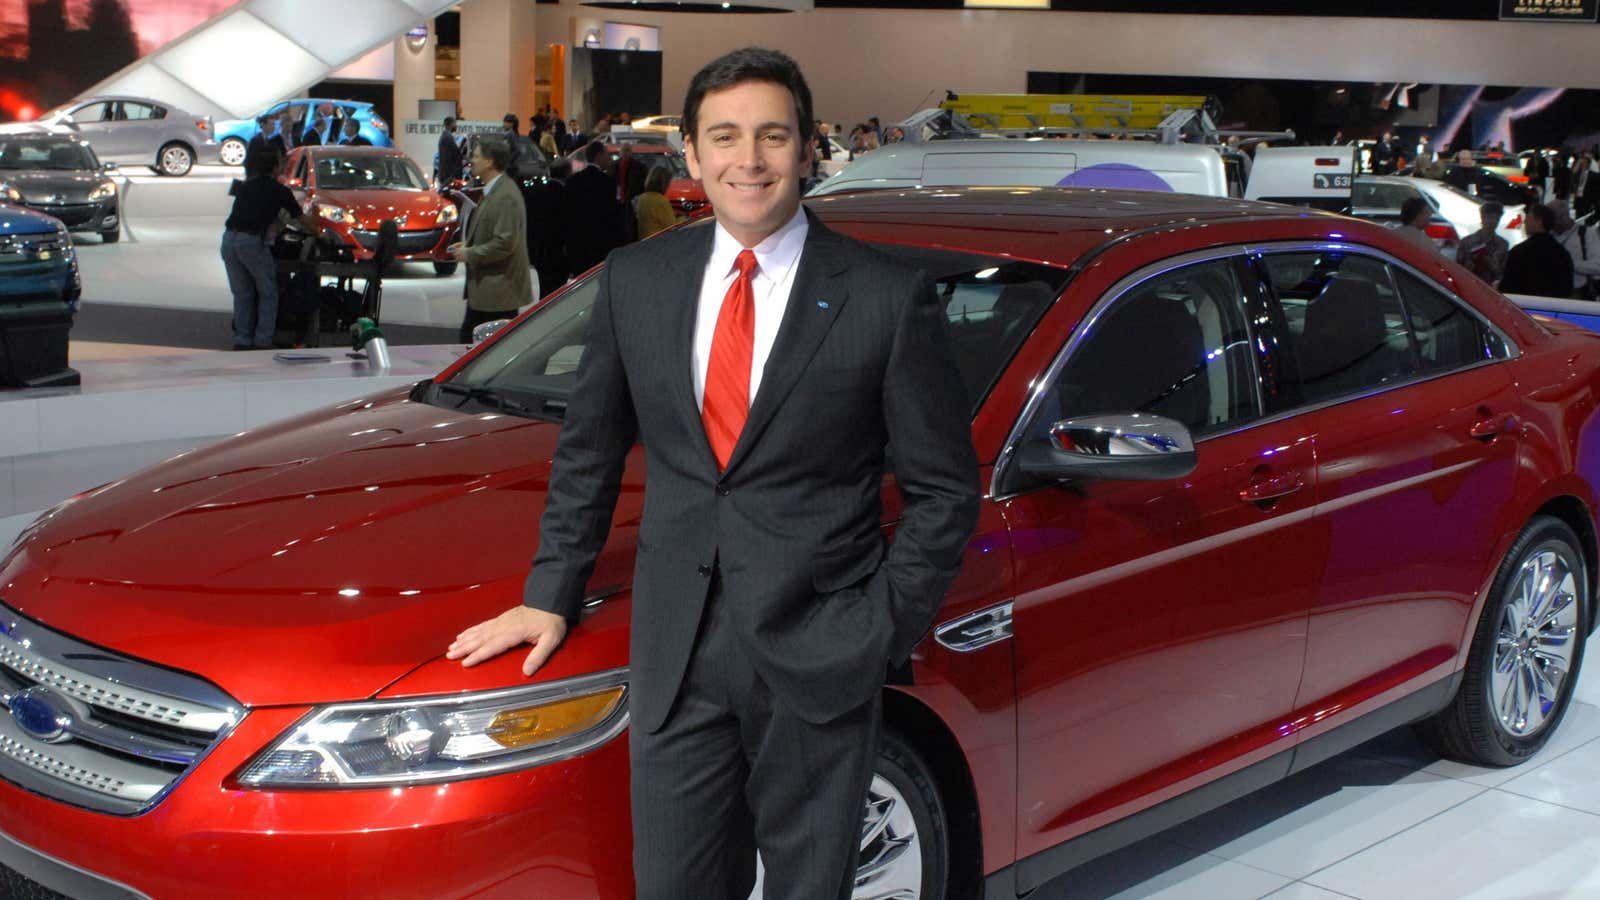 New Ford COO Mark Fields, who has extensive downsizing credentials, is in pole position for the top spot